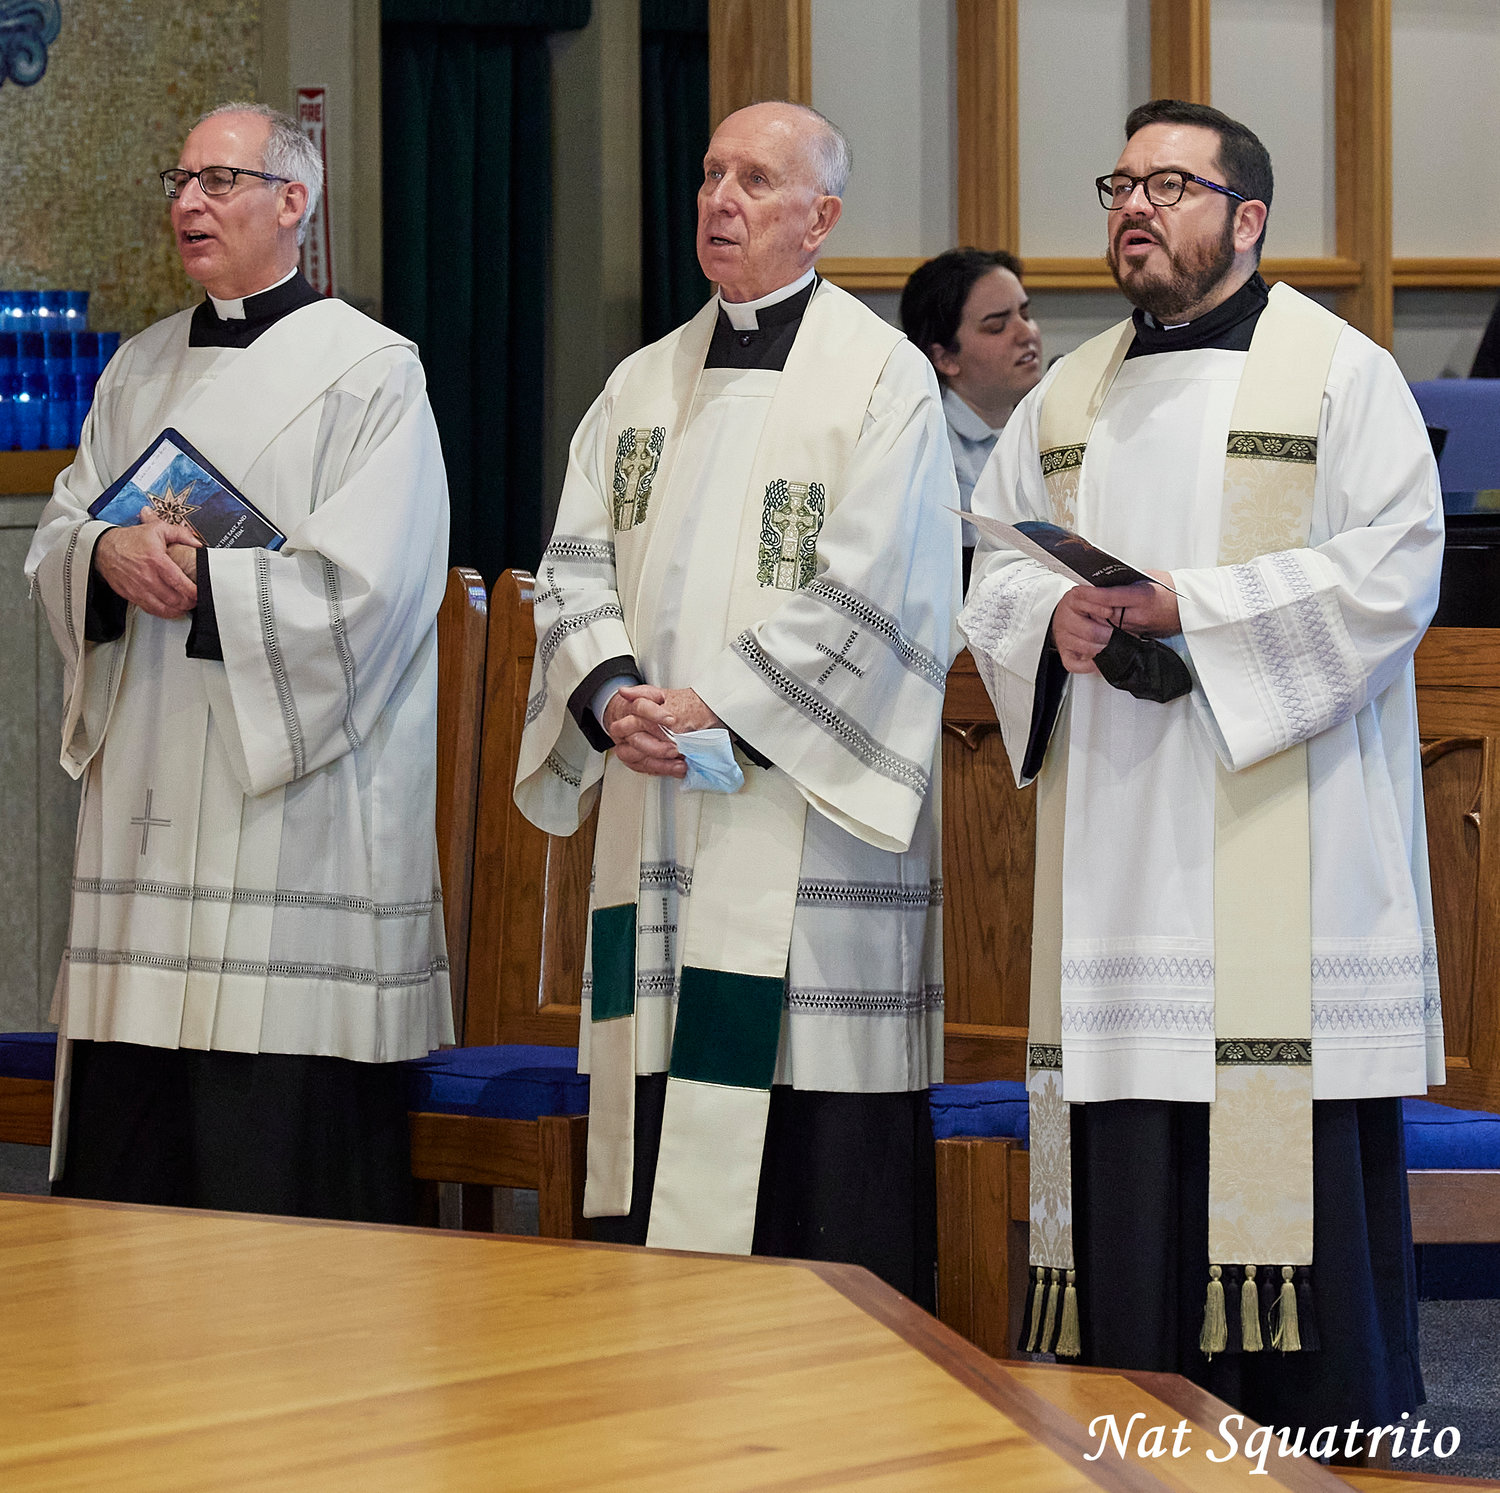 Deacon John Pryor (St. Mary’s), keynote speaker Father John Kiley, and Father Joseph Upton (St. Mary’s) during the 25th annual ecumenical service this past Sunday at St. Mary of the Bay in Warren.